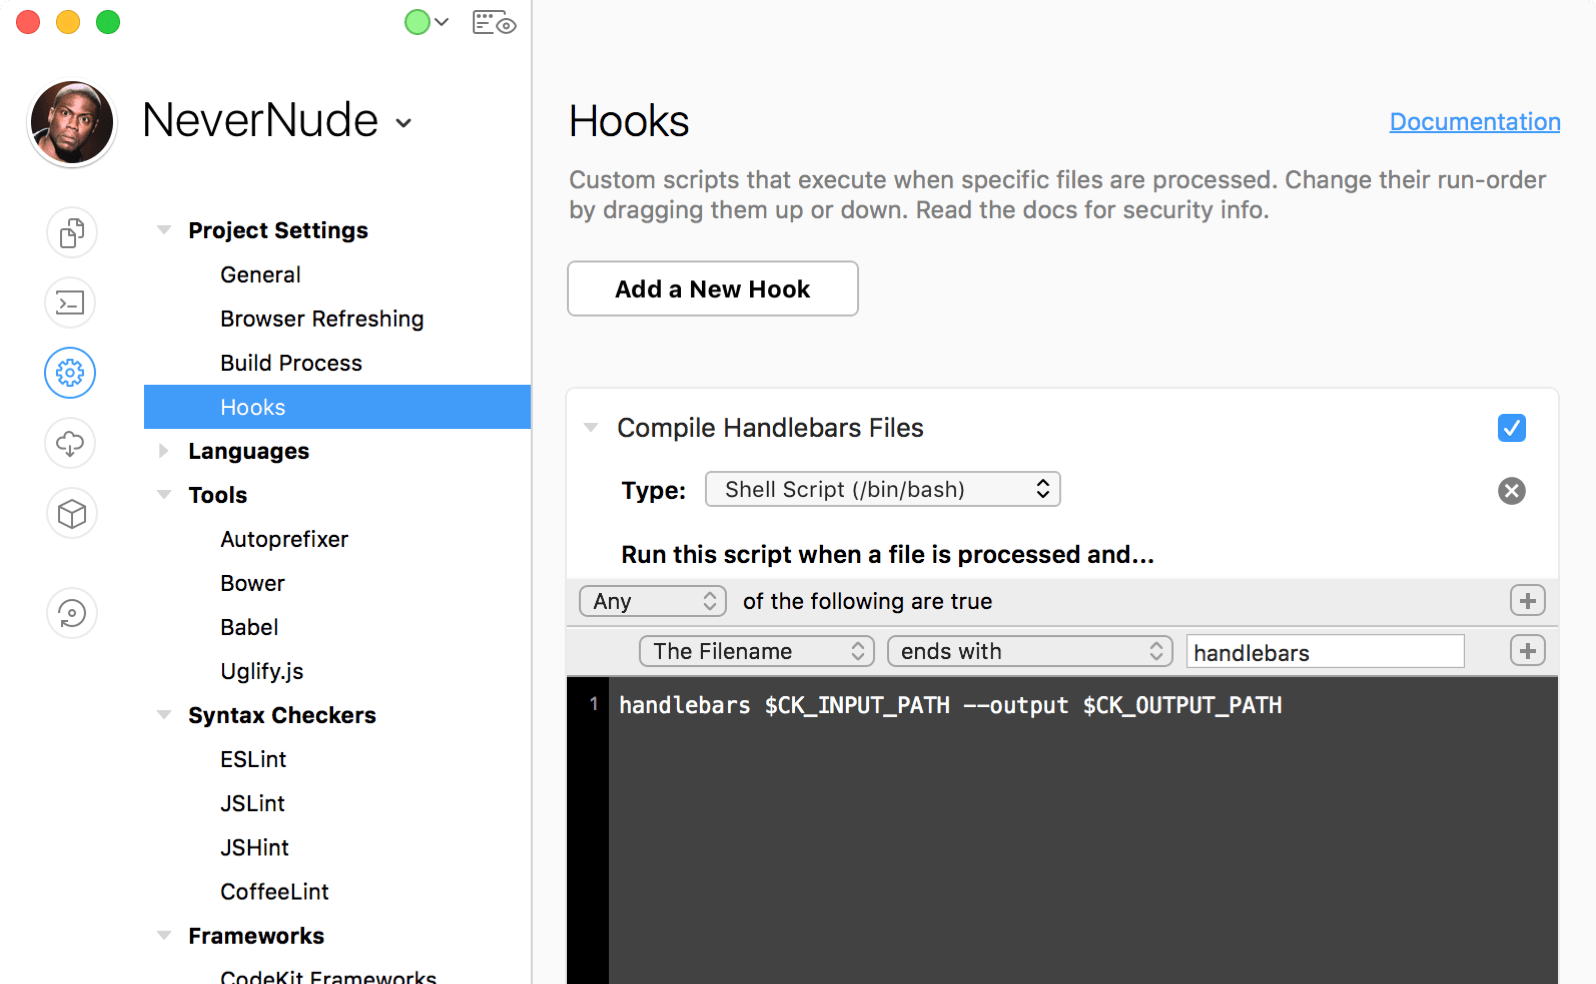 The Hooks category of Project Settings in the CodeKit window